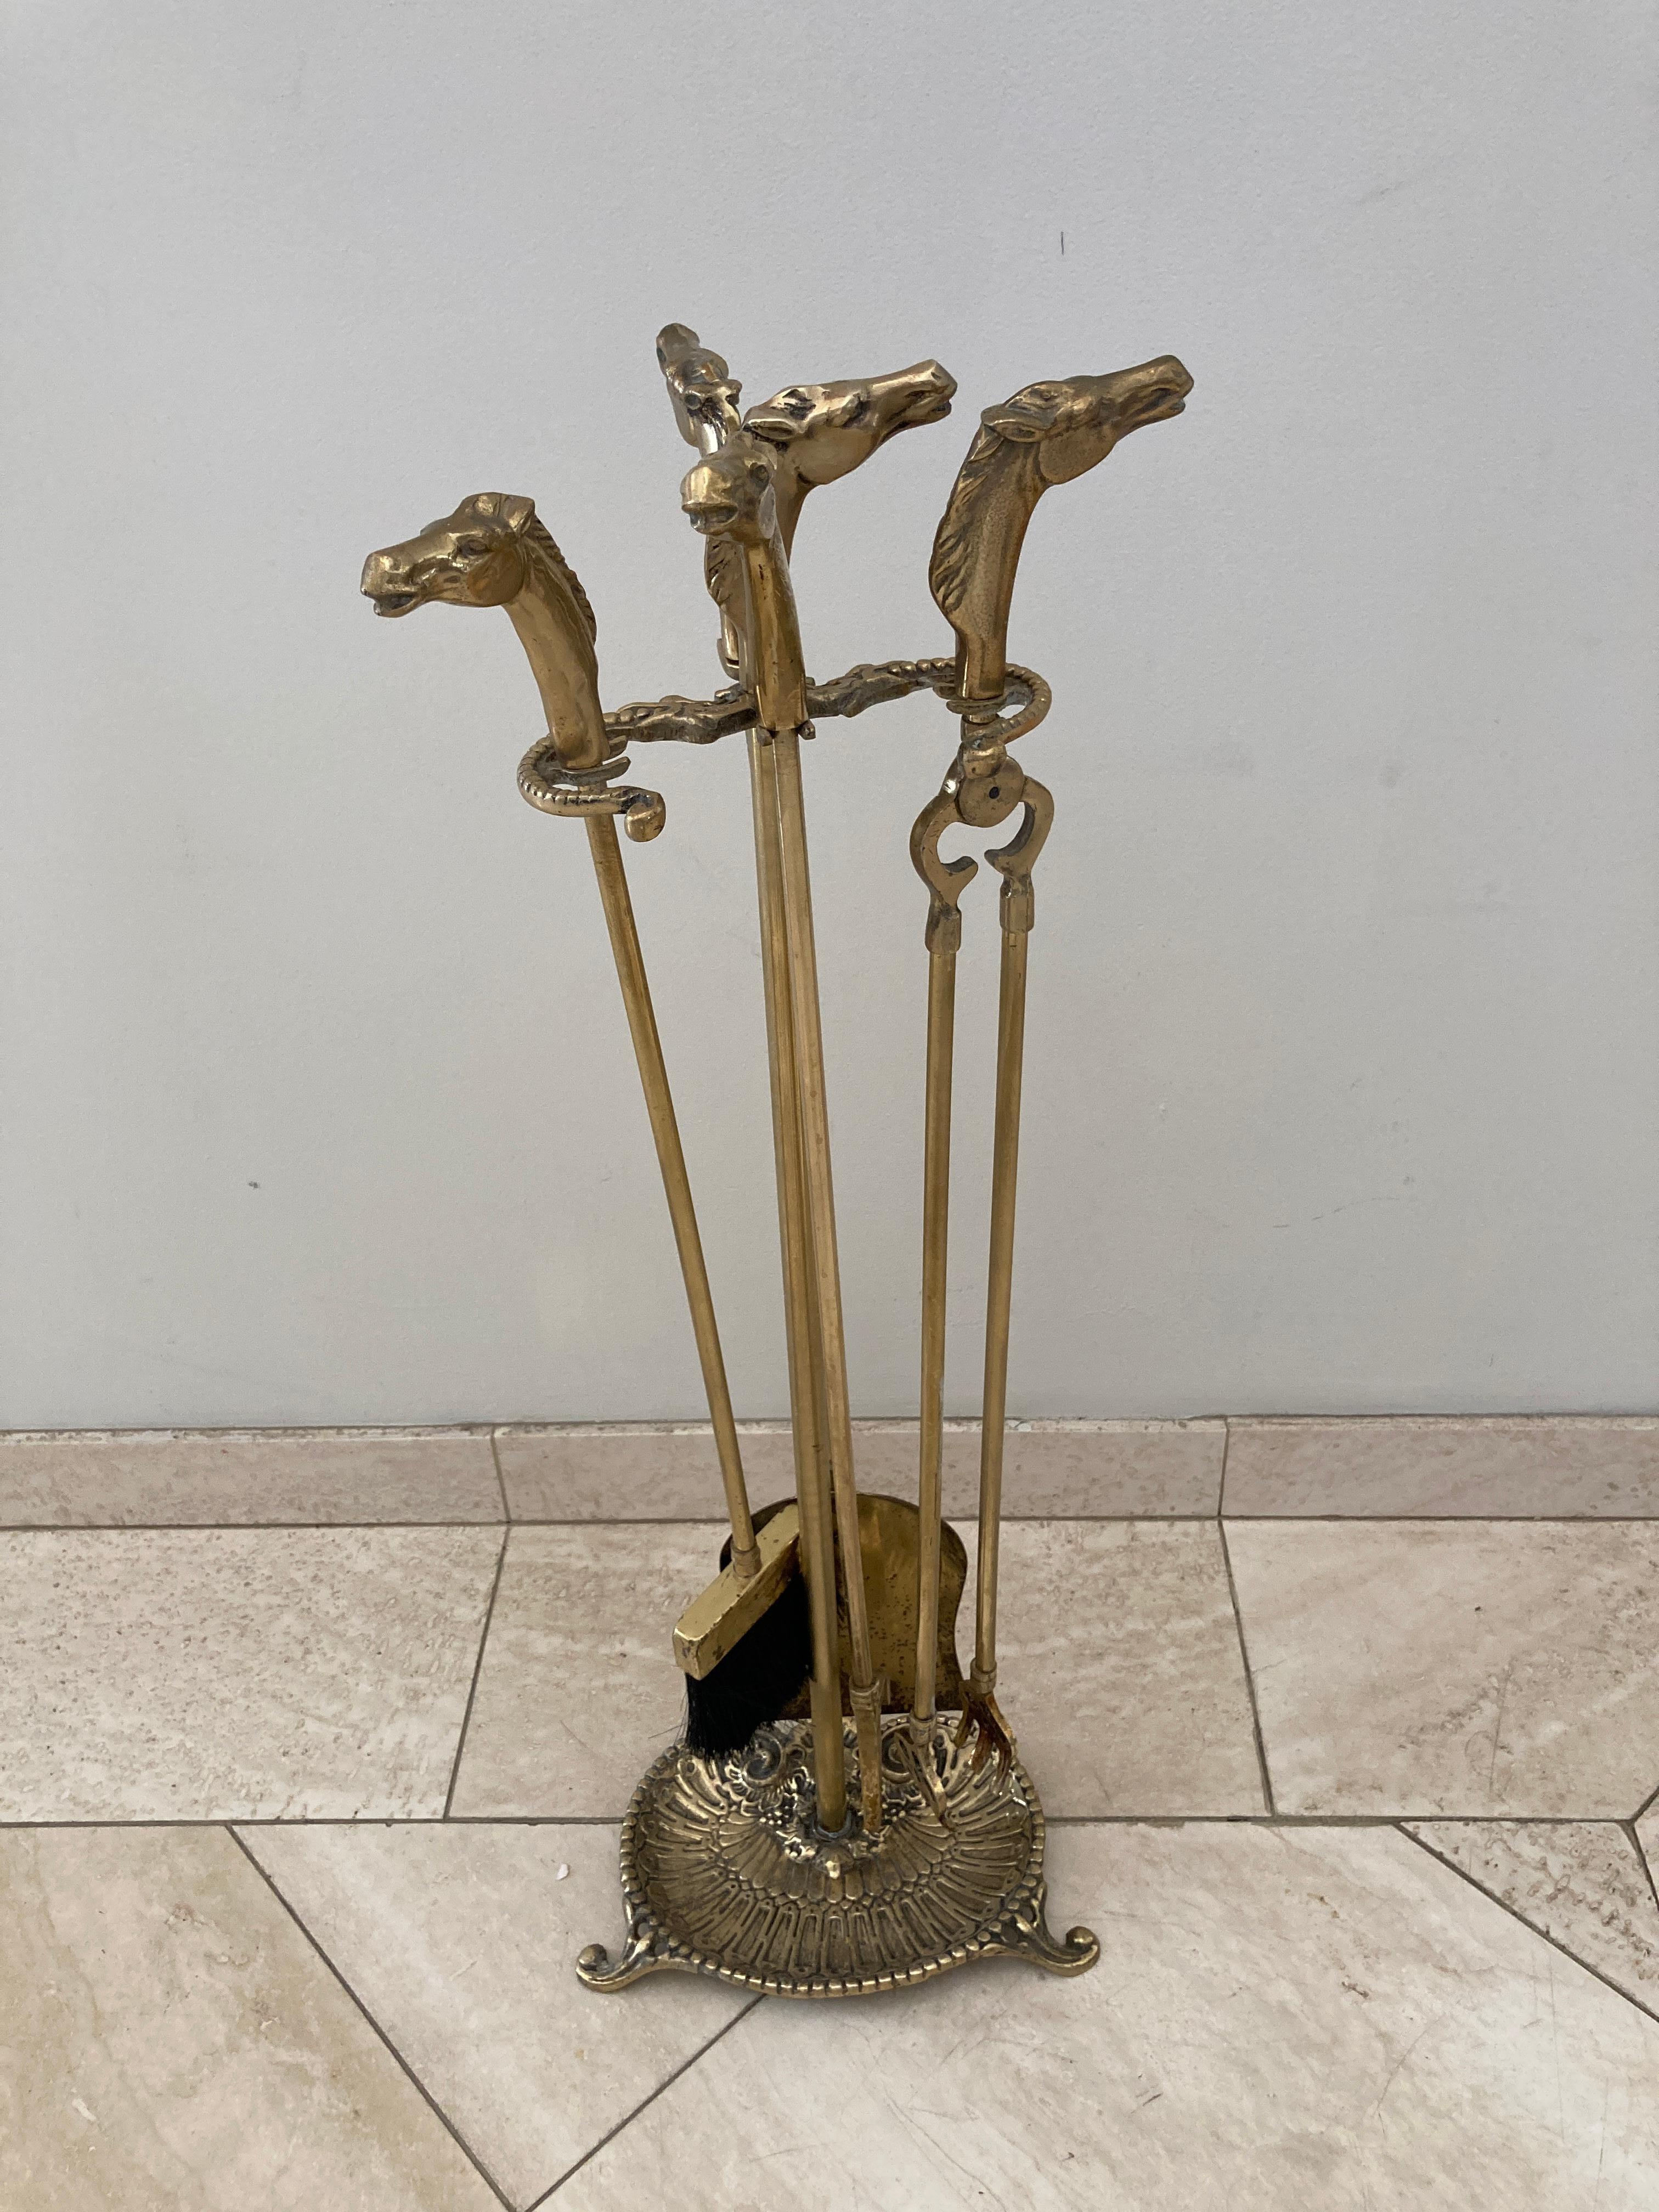 Vintage equestrian horse brass heads fireplace tools.
This set of vintage brass fire tools, includes broom, tongs, shovel and poker on elaborate stand with gallery to the base, each with beautifully detailed horse head motif as handle. 
Great design